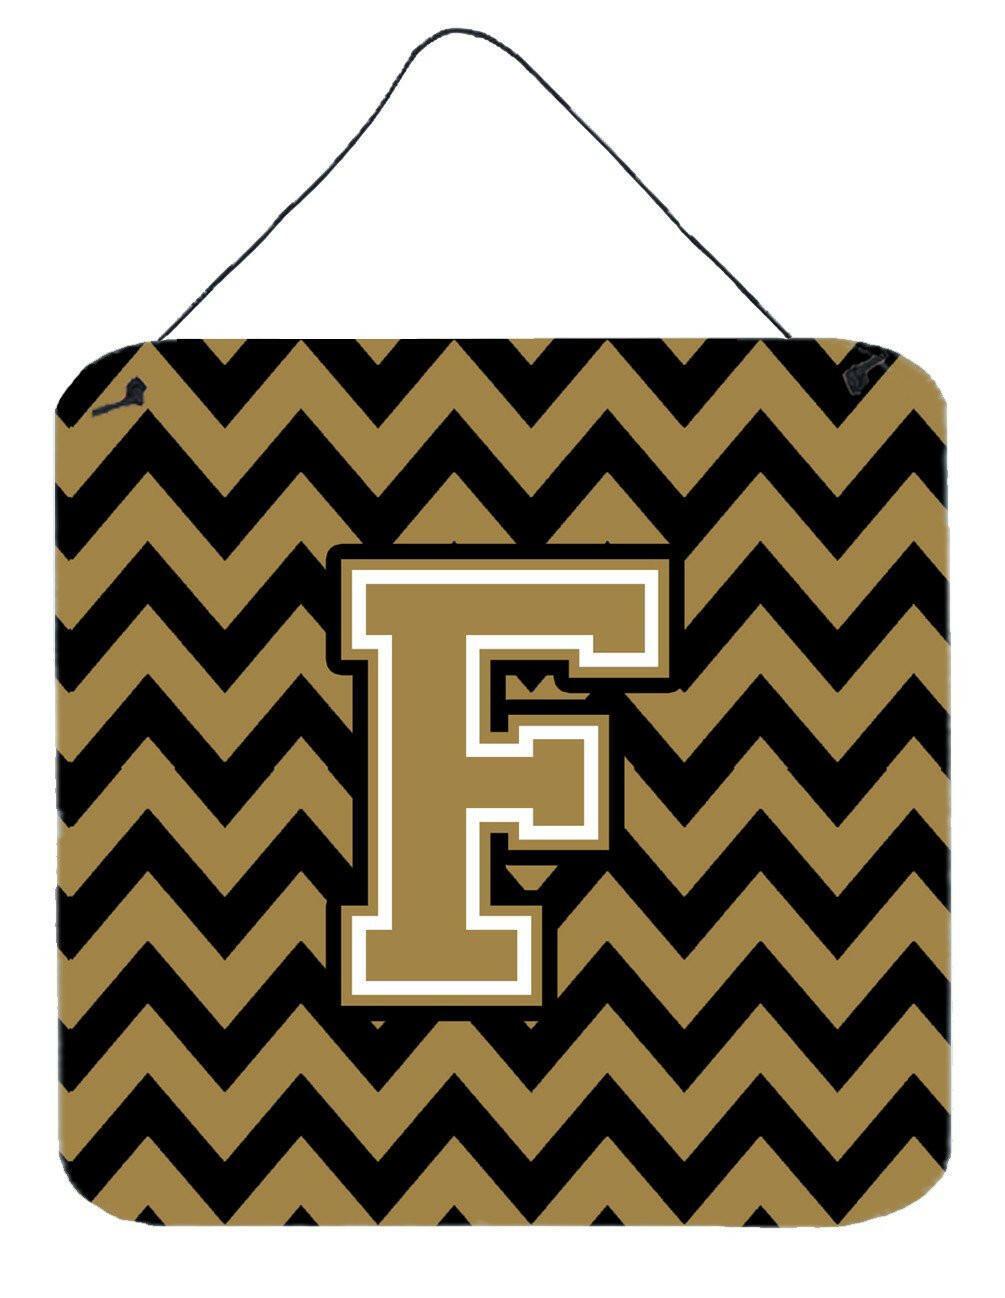 Letter F Chevron Black and Gold  Wall or Door Hanging Prints CJ1050-FDS66 by Caroline's Treasures